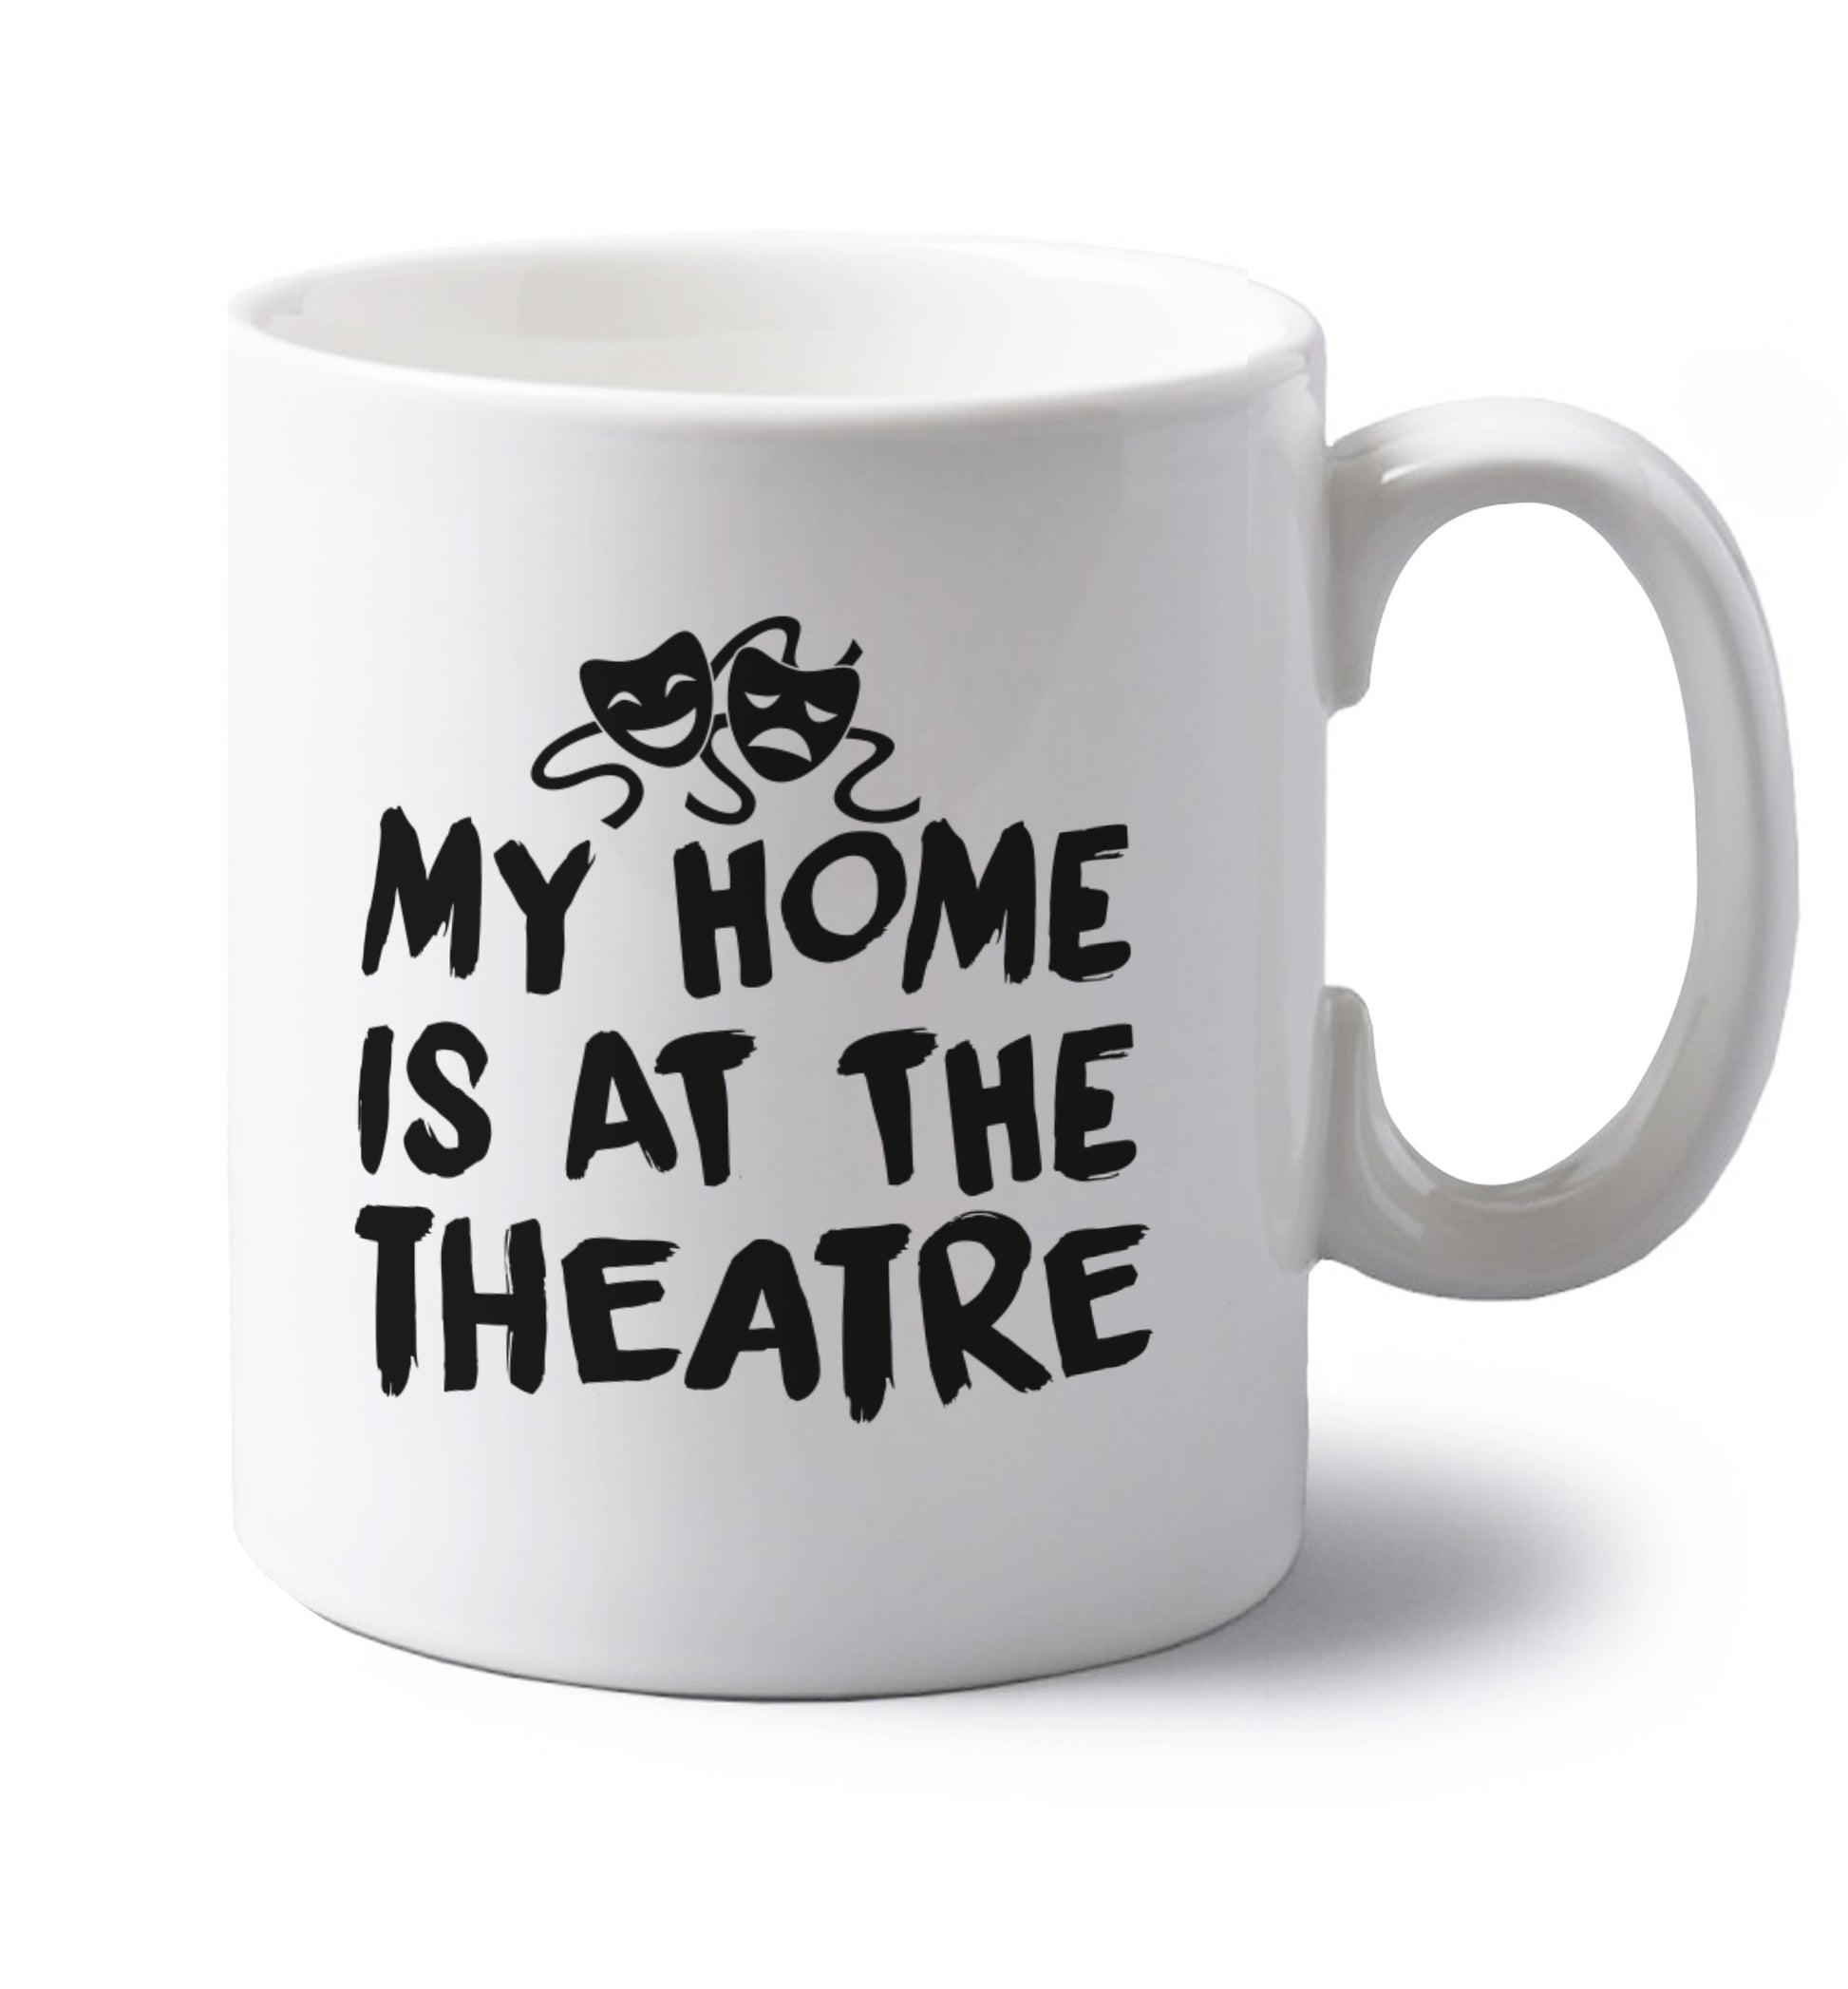 My home is at the theatre left handed white ceramic mug 